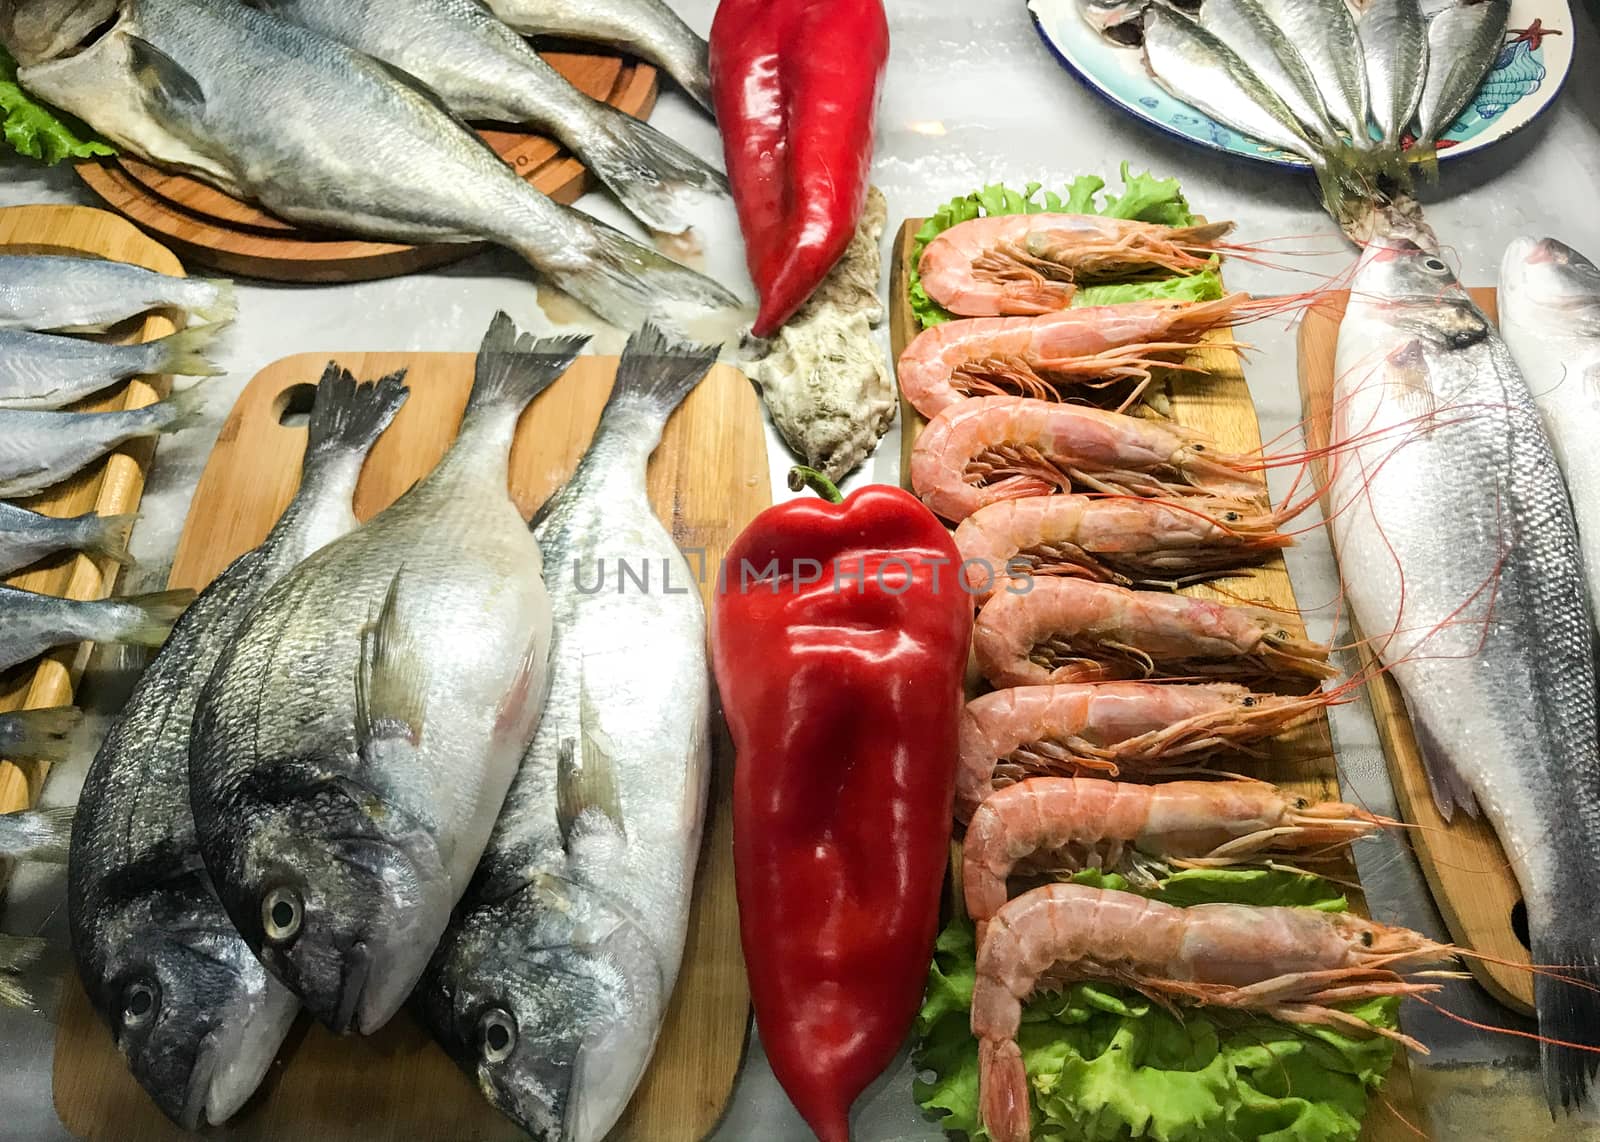 Fresh Fish And Seafood Exposed For Sale In The Fish Market by nenovbrothers